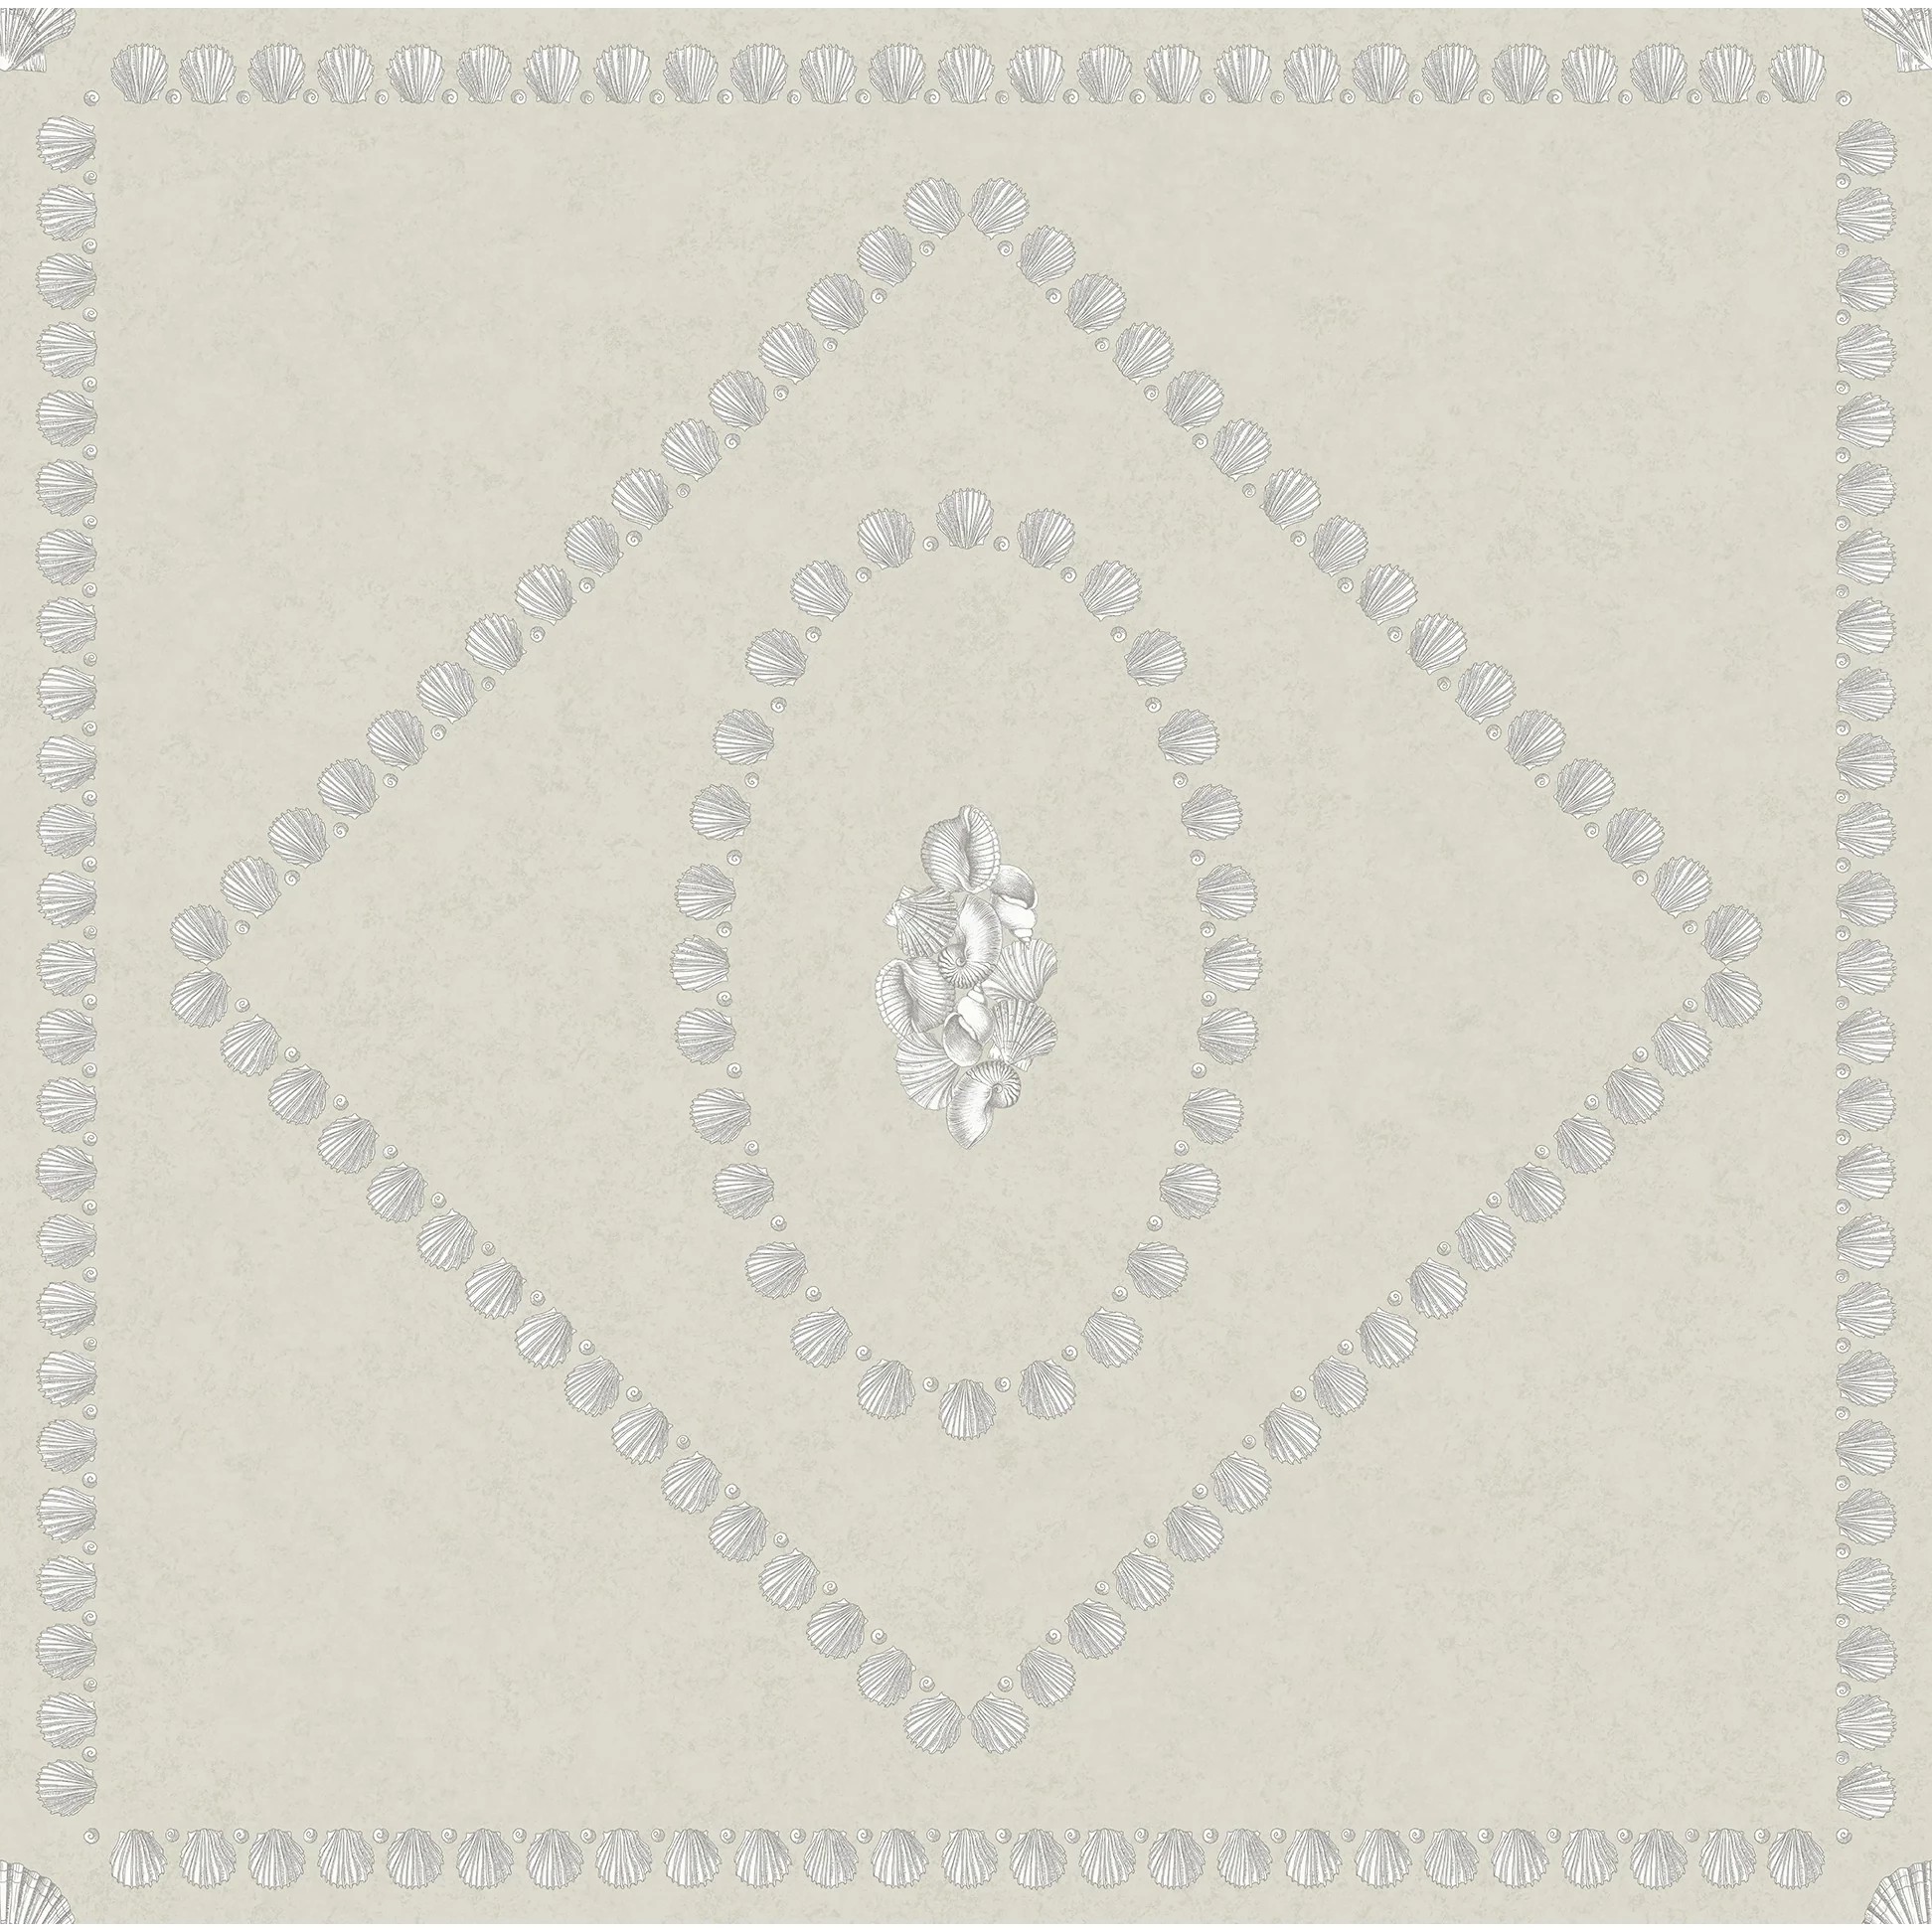 Conchiglie Pearl On Parchment 123_5024